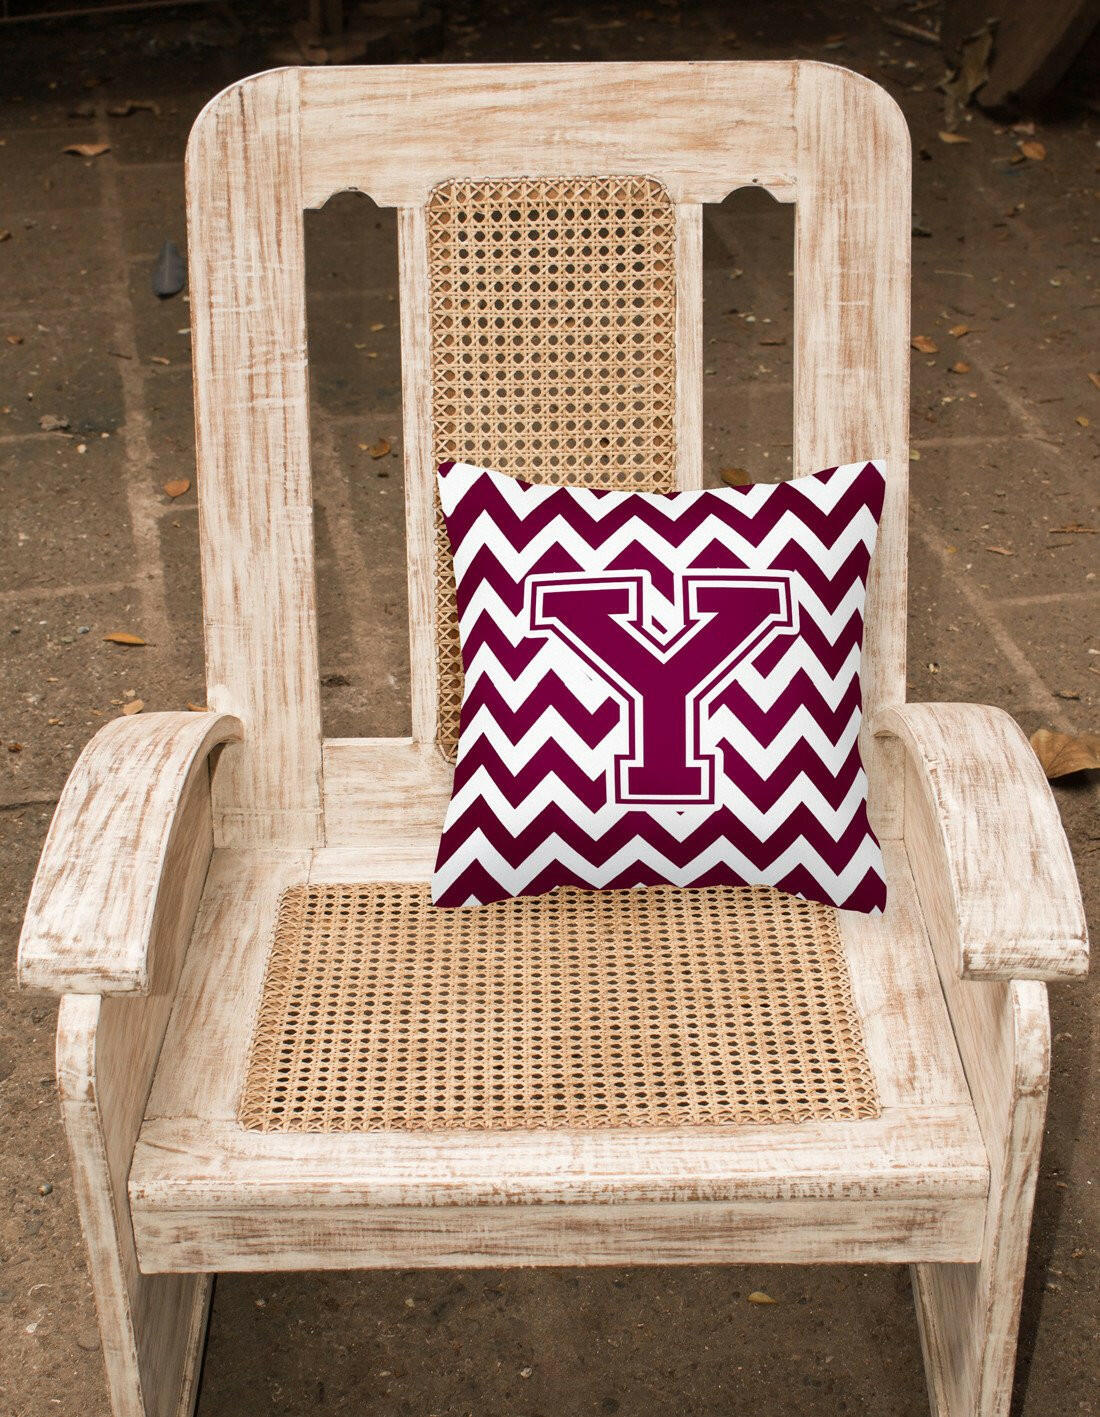 Letter Y Chevron Maroon and White  Fabric Decorative Pillow CJ1051-YPW1414 by Caroline's Treasures